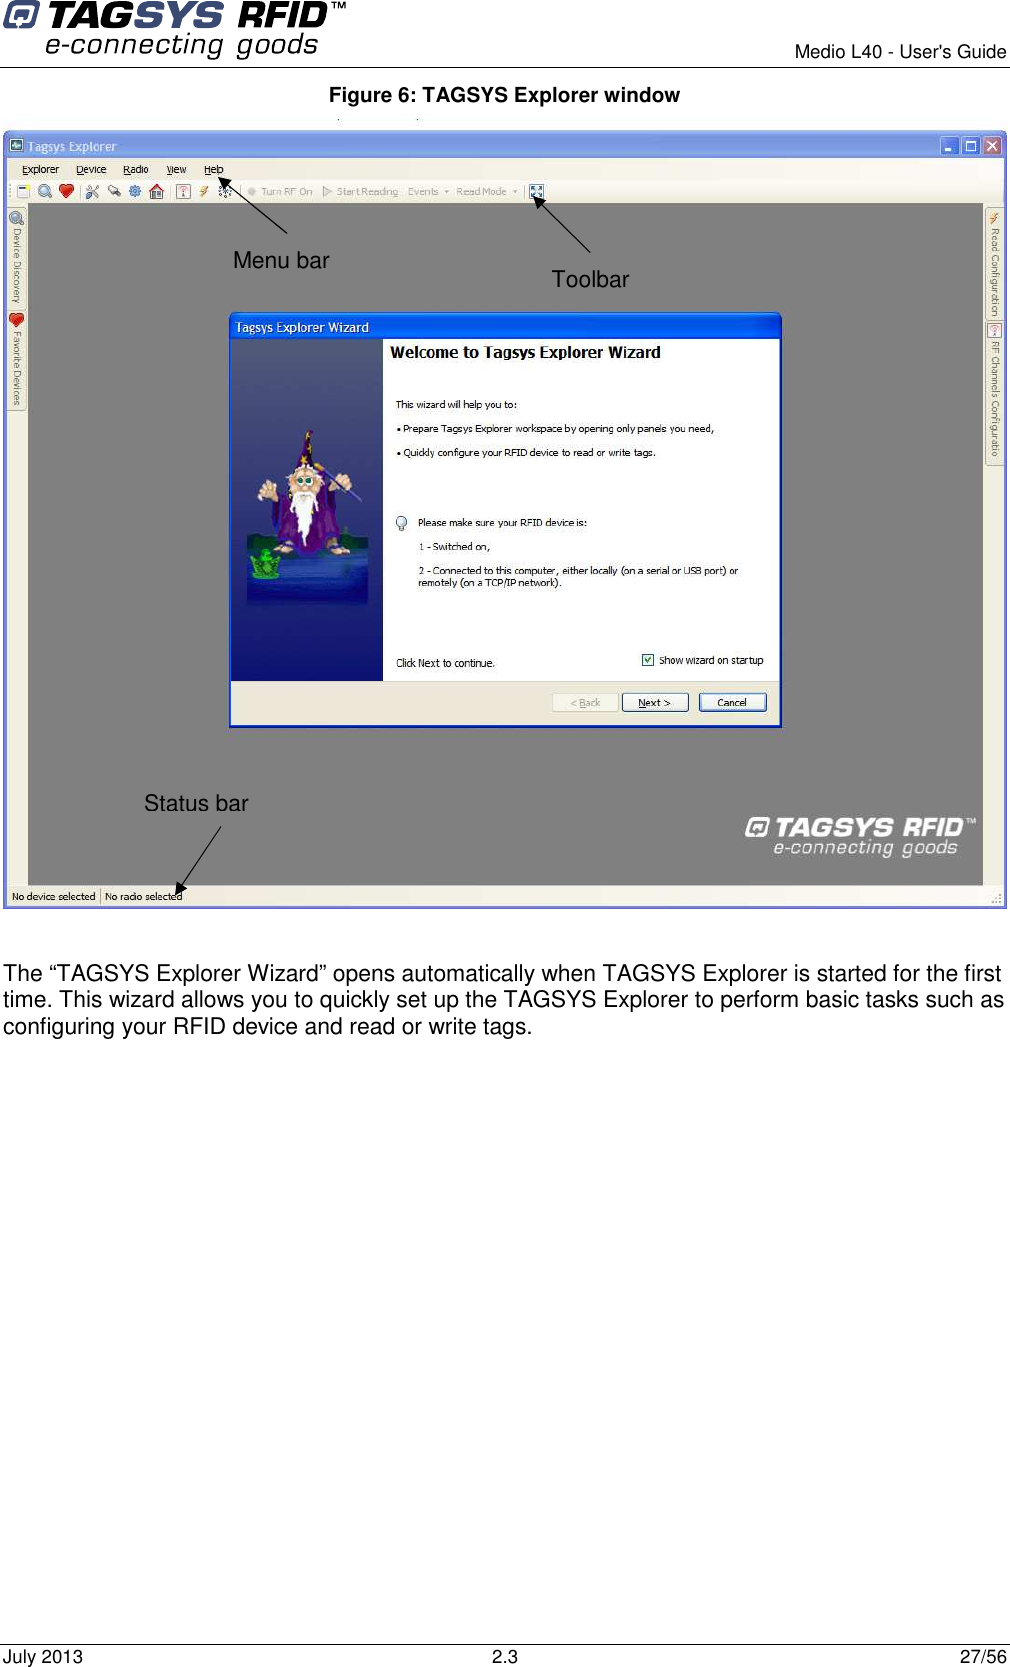        Medio L40 - User&apos;s Guide July 2013  2.3  27/56  Figure 6: TAGSYS Explorer window   The “TAGSYS Explorer Wizard” opens automatically when TAGSYS Explorer is started for the first time. This wizard allows you to quickly set up the TAGSYS Explorer to perform basic tasks such as configuring your RFID device and read or write tags. Toolbar  Menu bar  Status bar 